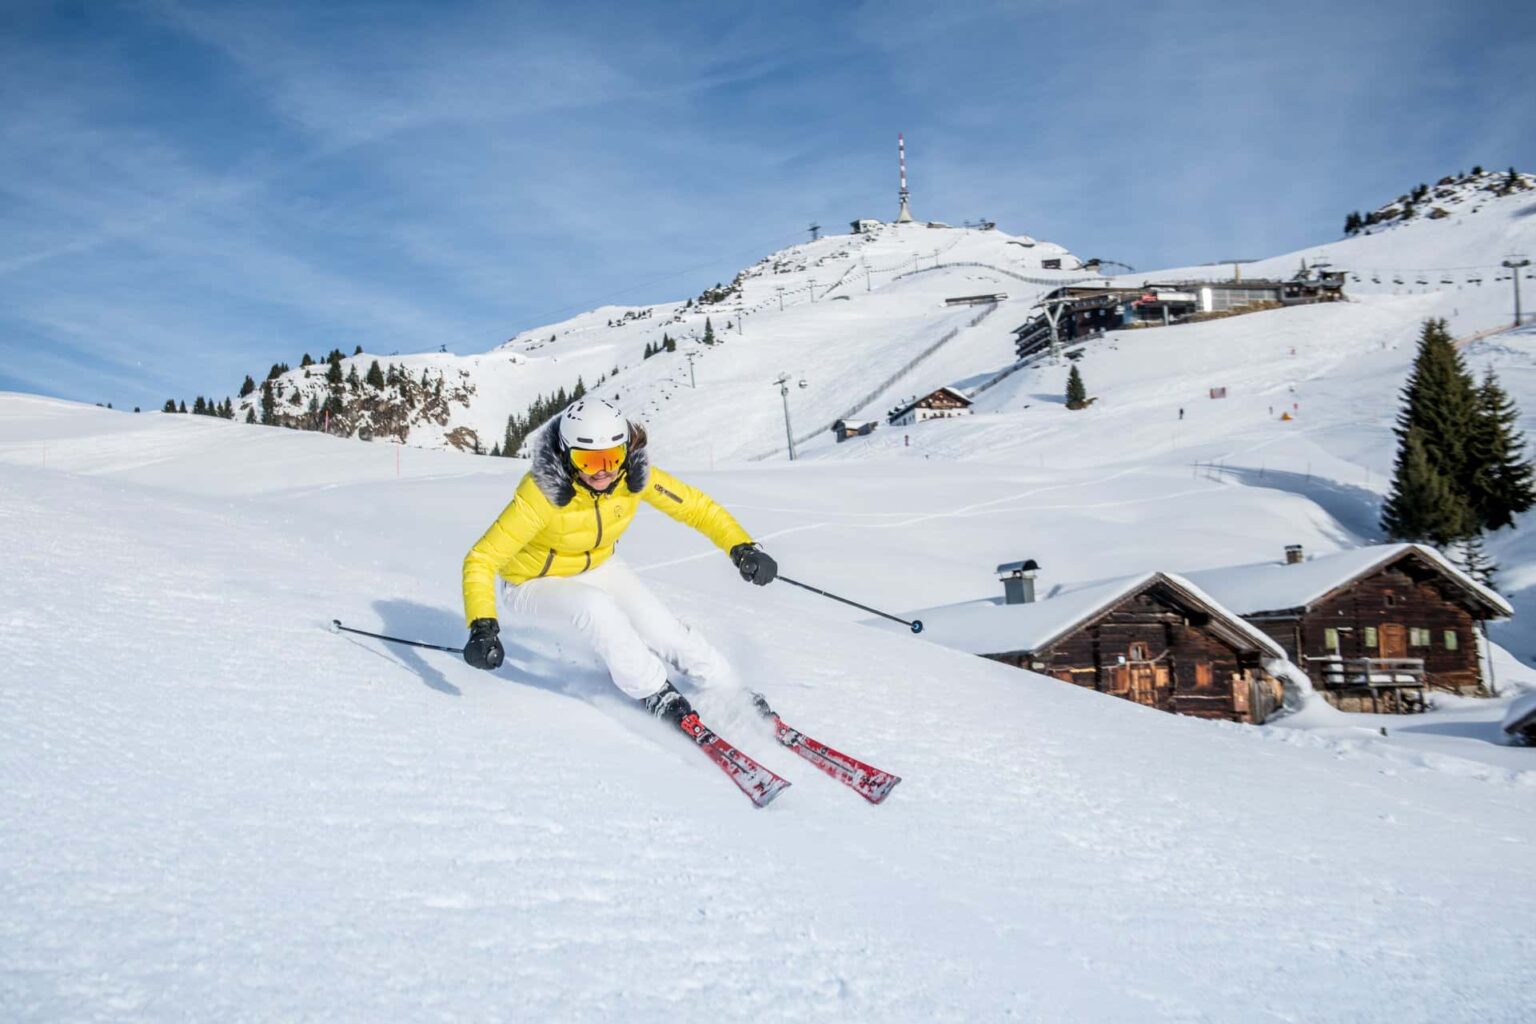 Austria has a spectacular ski scene with resorts full of charm and trails linking small, pretty villages. Here's a list of skiing resorts in Austria.